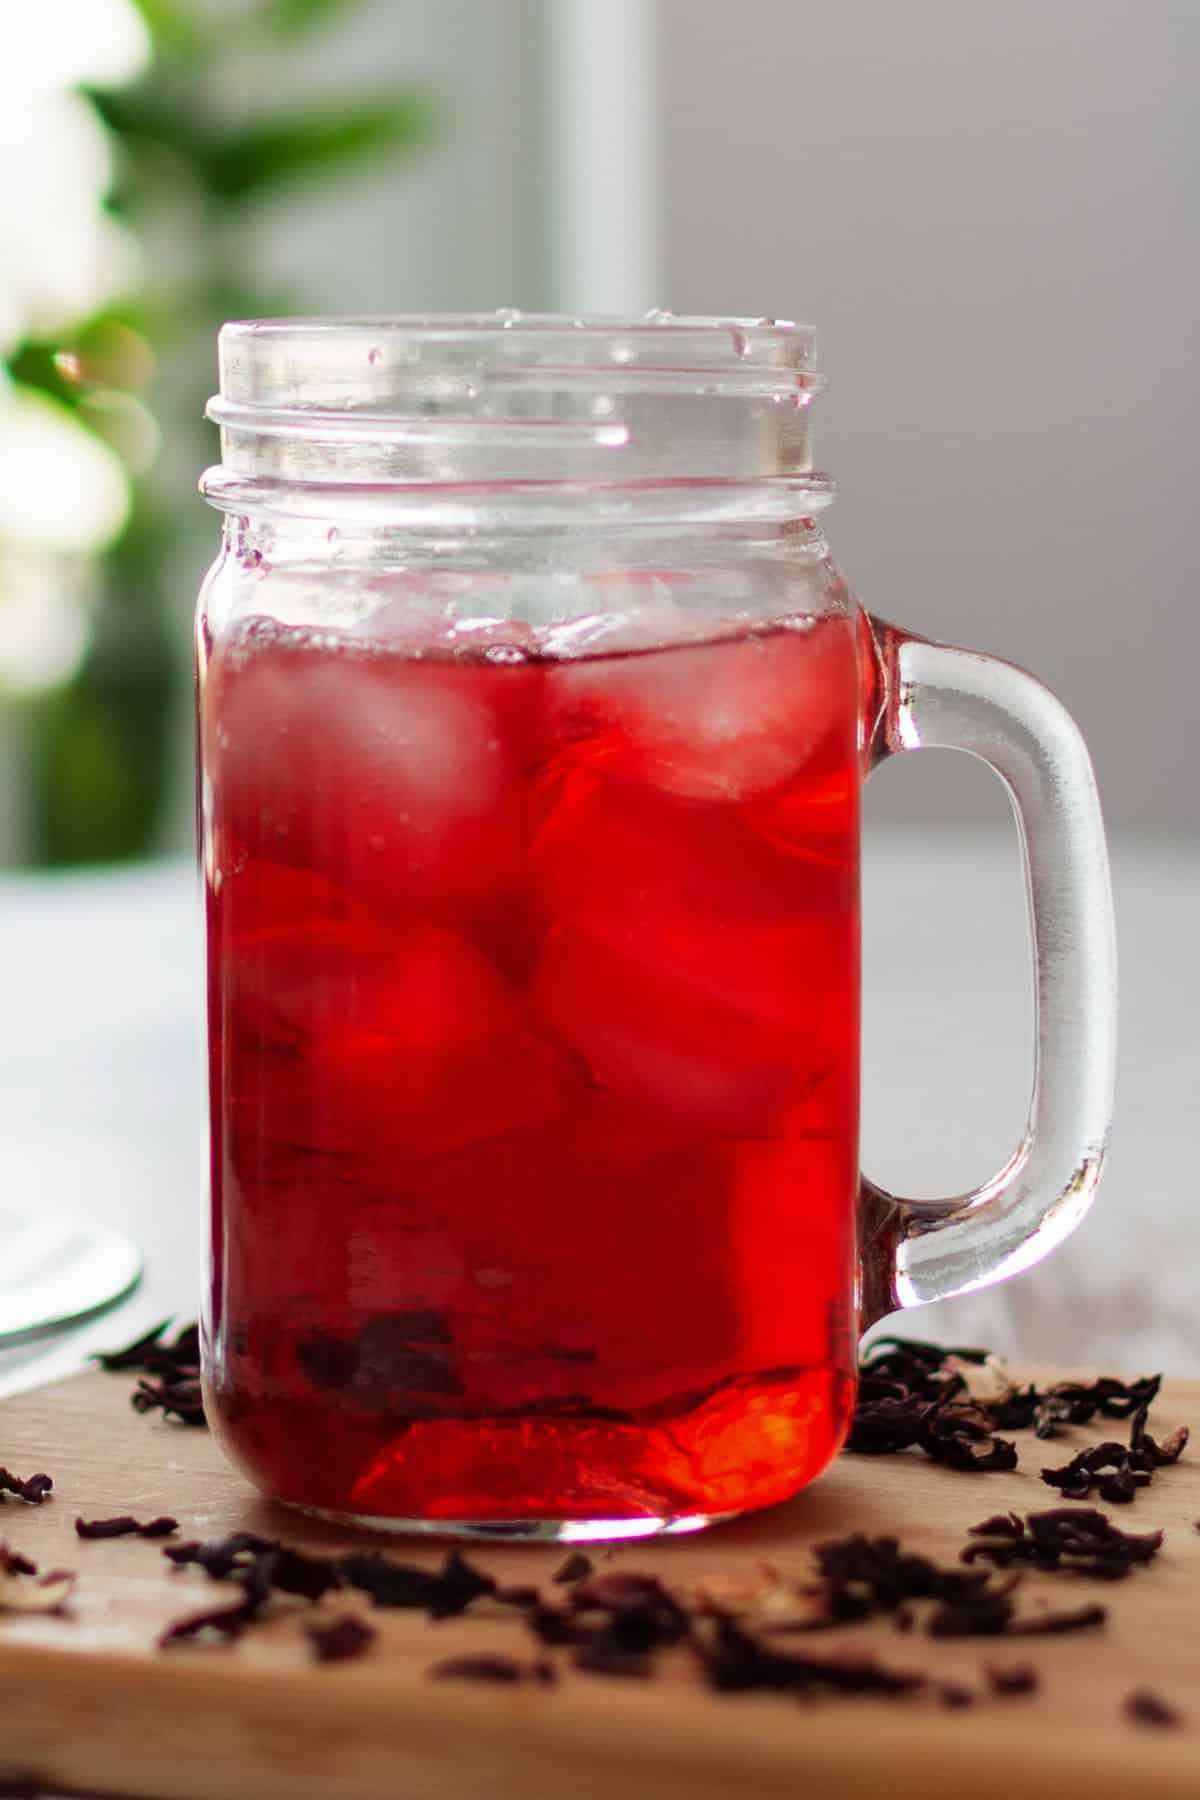 Clear glass mug filled with red hibiscus tea.